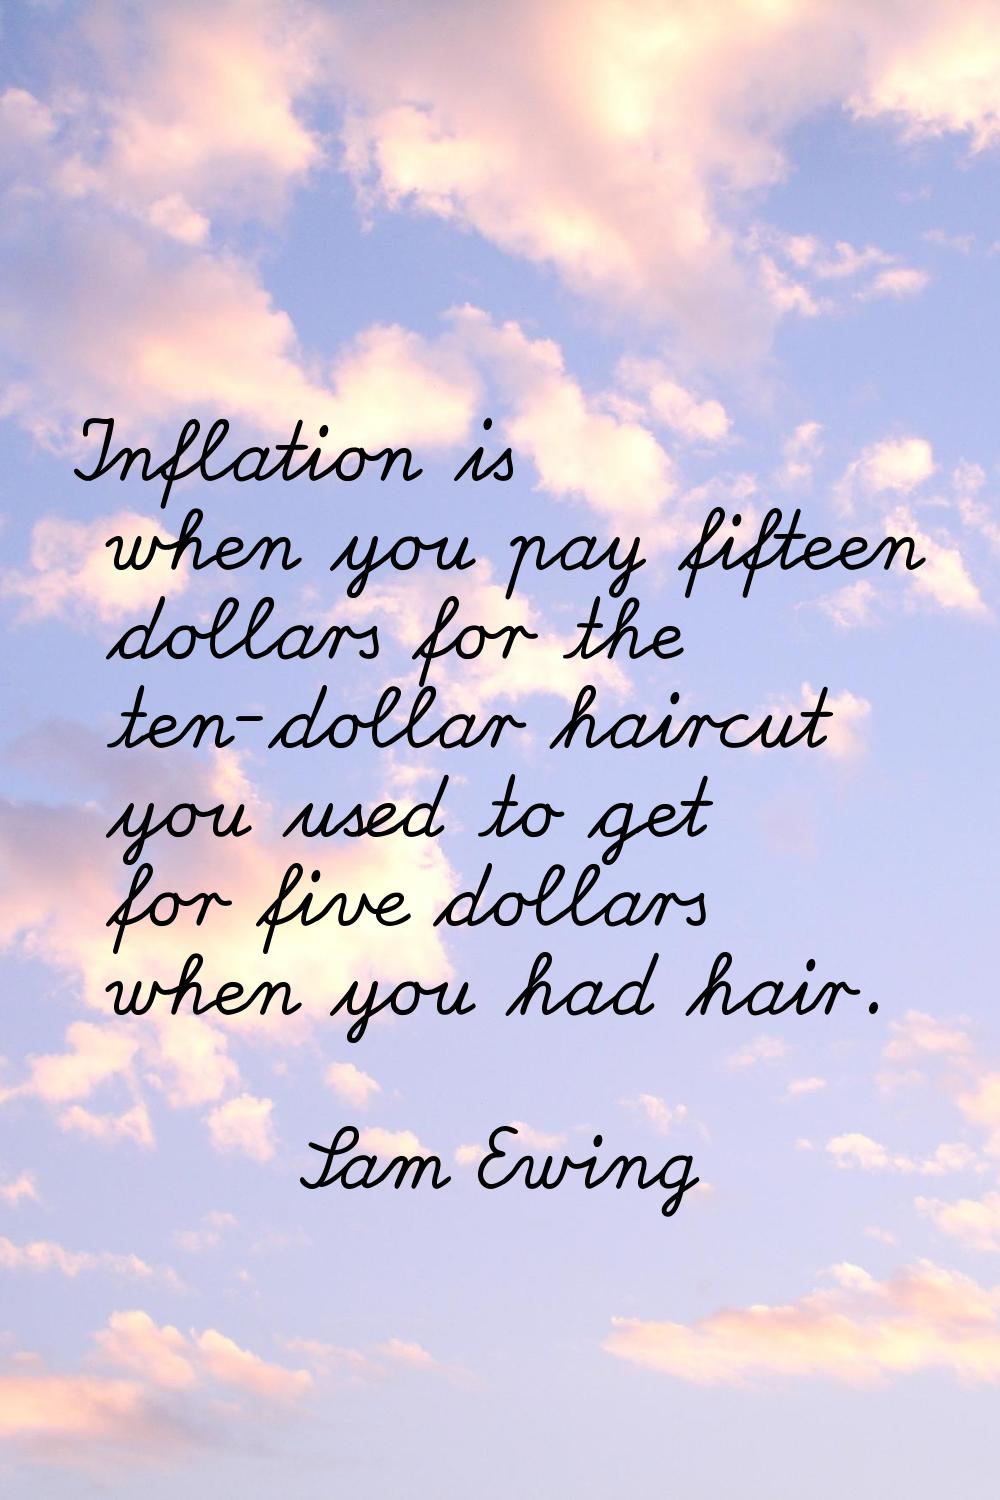 Inflation is when you pay fifteen dollars for the ten-dollar haircut you used to get for five dolla